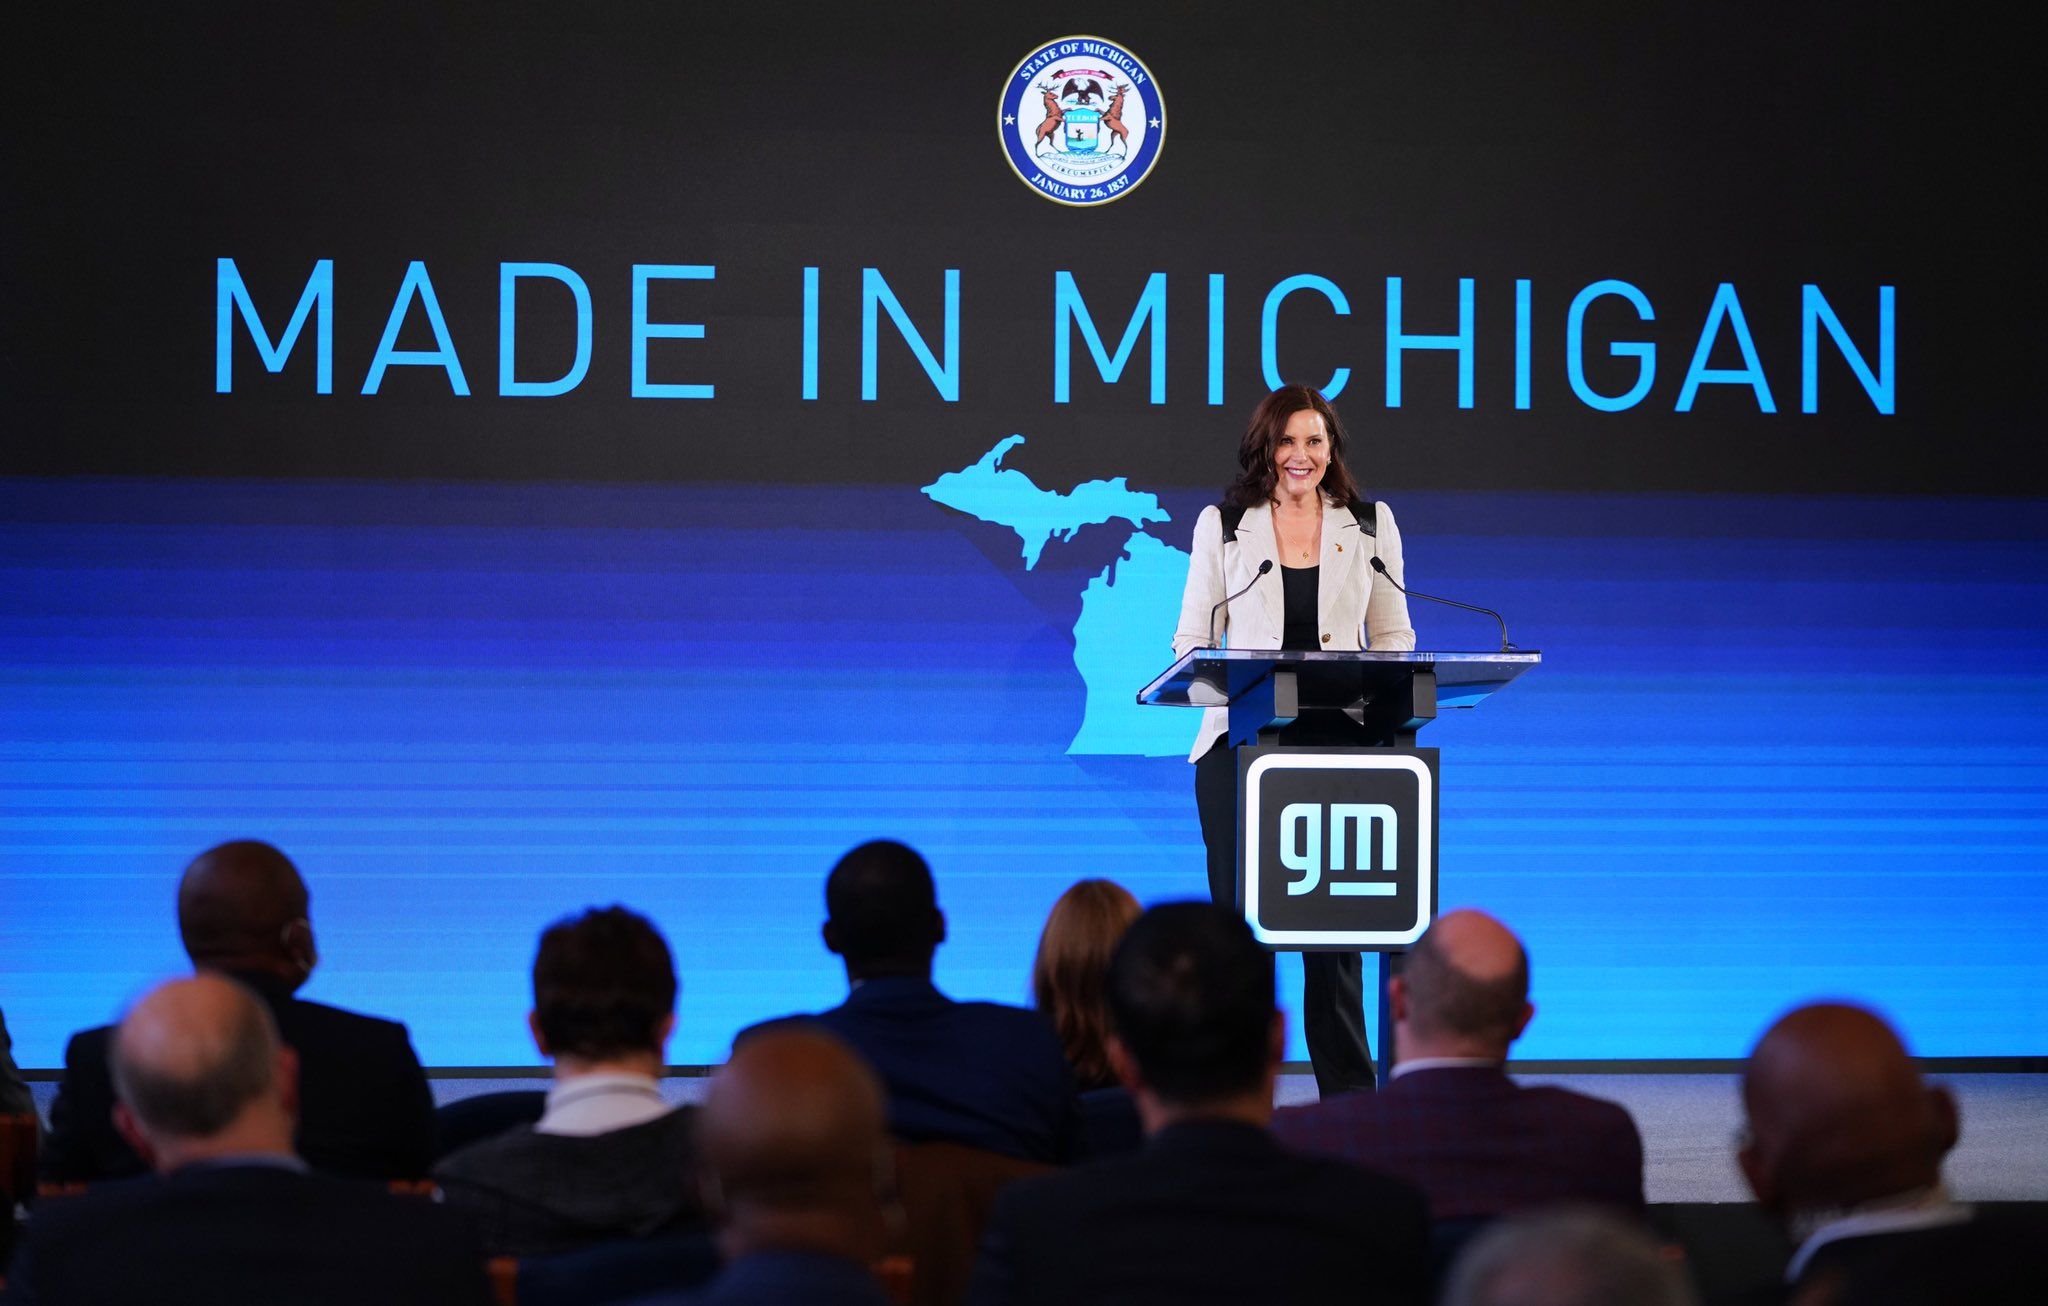 2nd guilty plea planned in alleged plot to kidnap Michigan Gov. Gretchen Whitmer